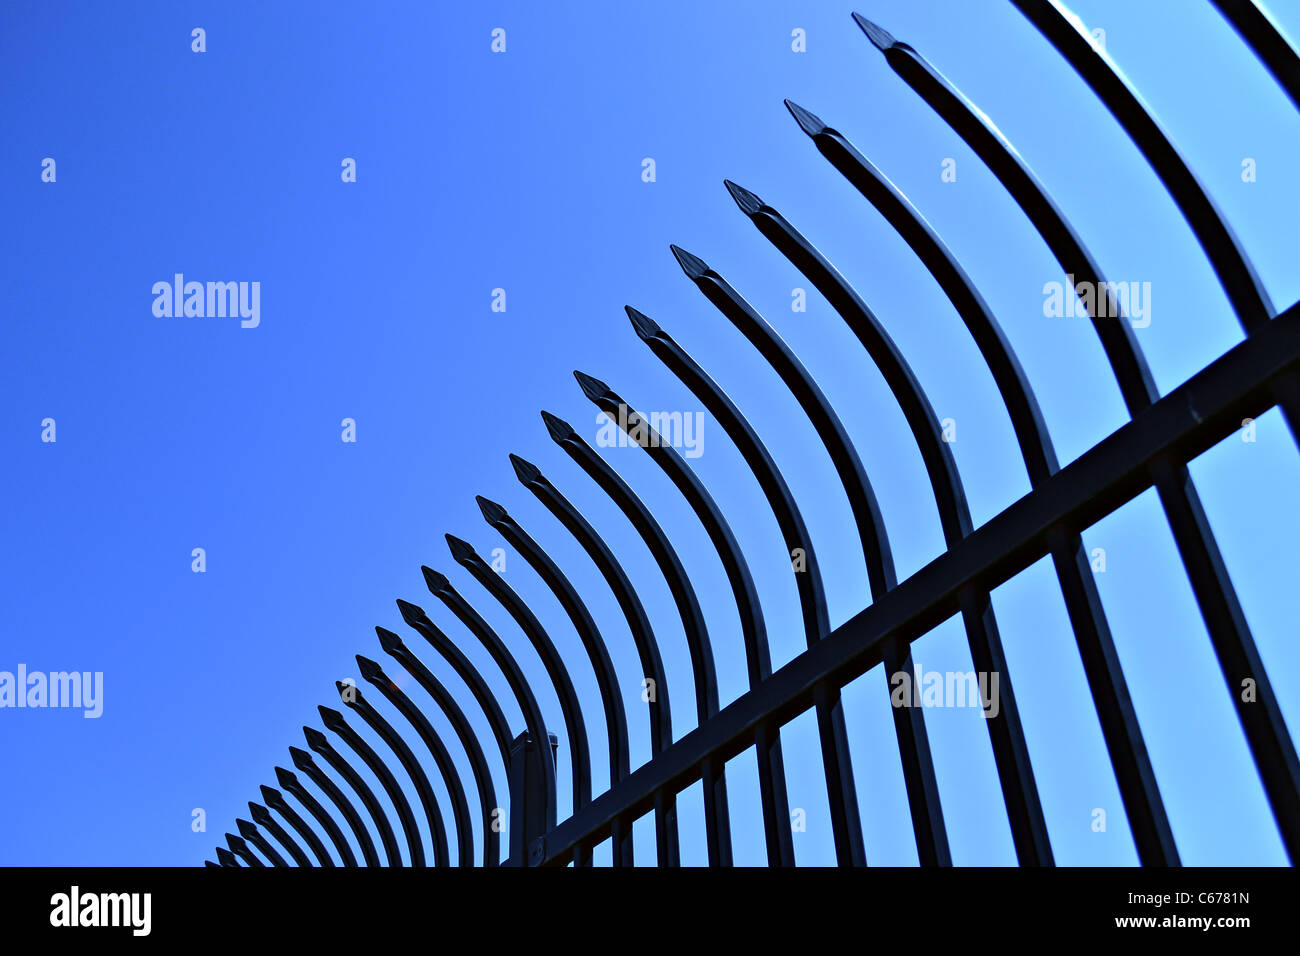 A view of curve spikes on top of a fence. Stock Photo